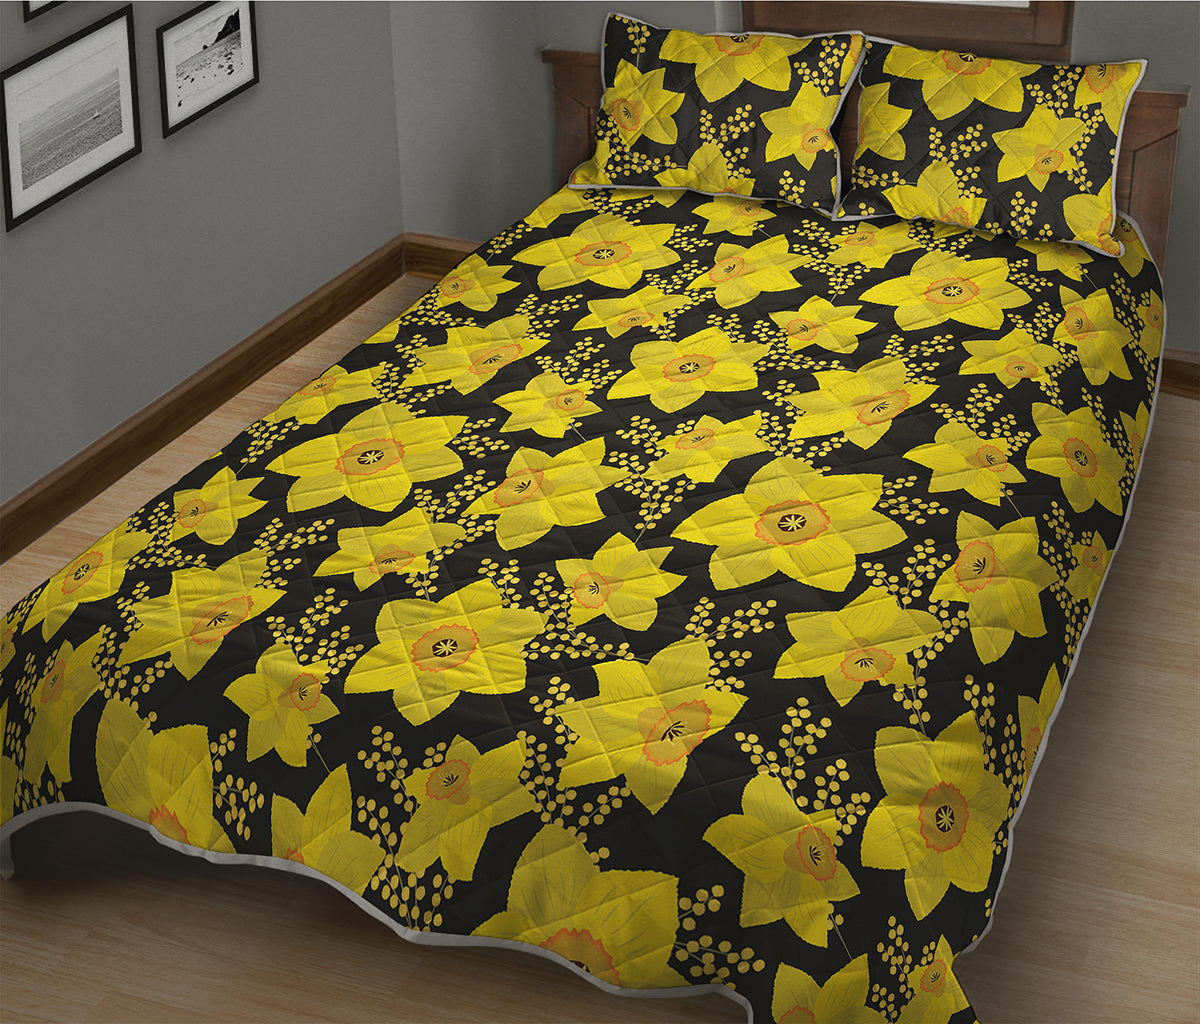 Daffodil And Mimosa Pattern Print Quilt Bed Set